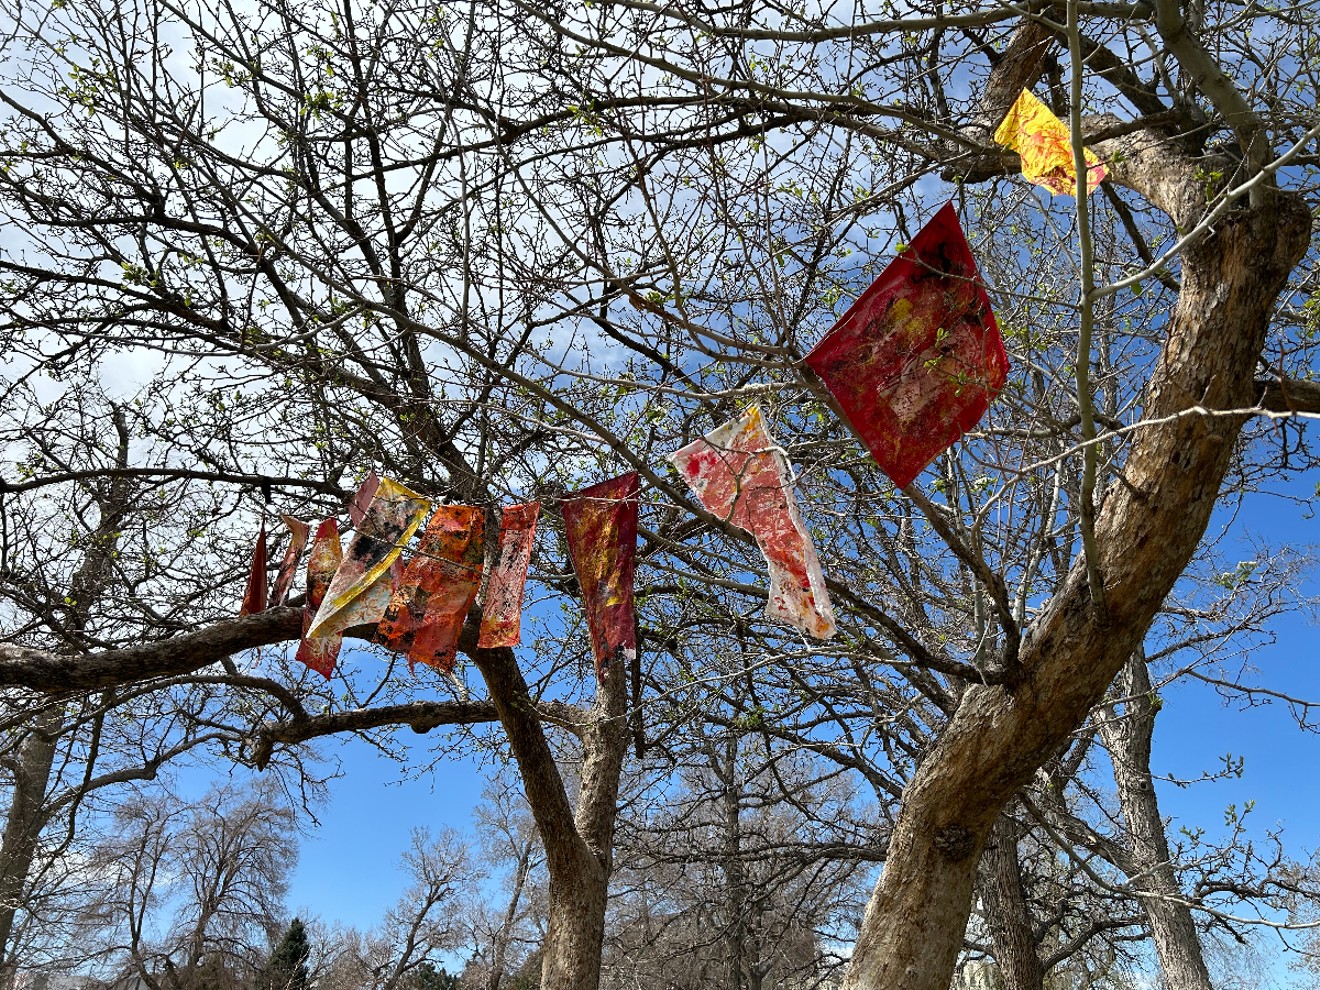 Painted flags hang from trees in La Alma Lincoln Park as part of the "Tree Tales" installation.